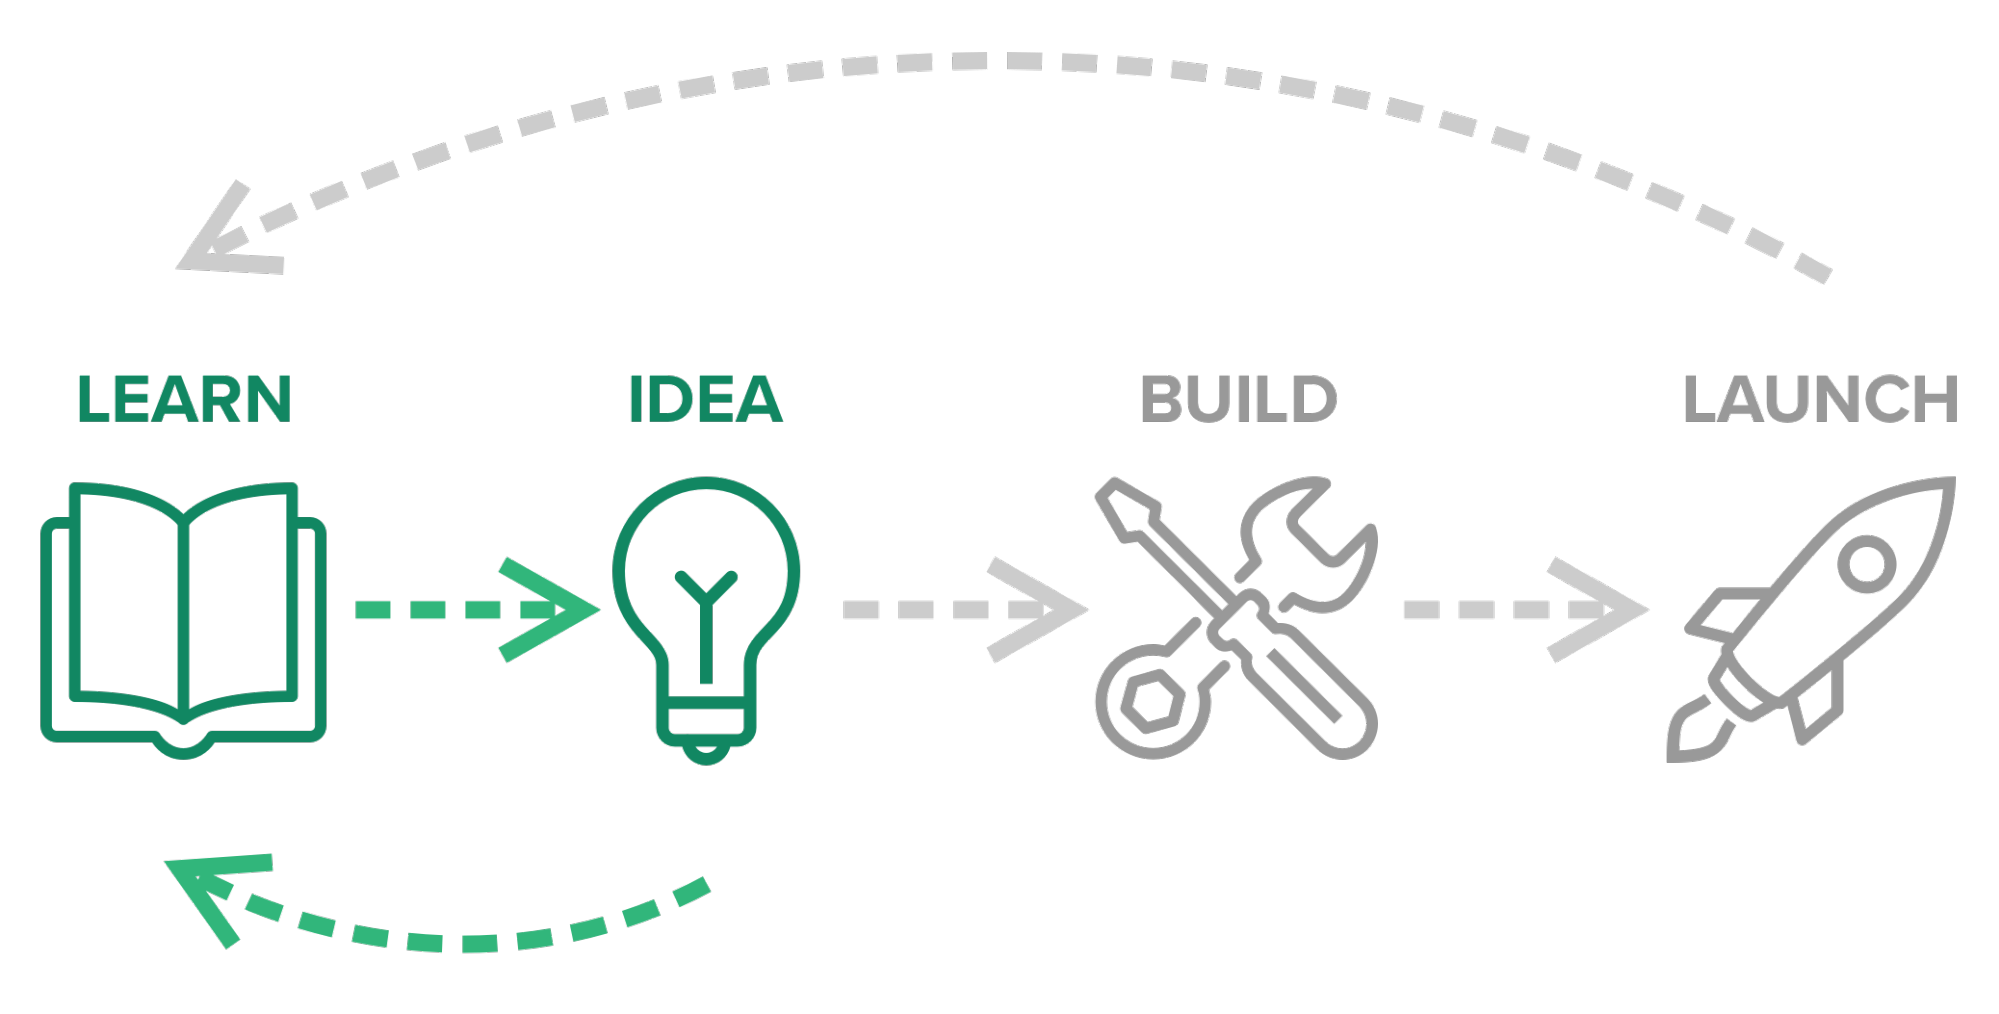 A digram showing the learn, idea, build, launch cycle